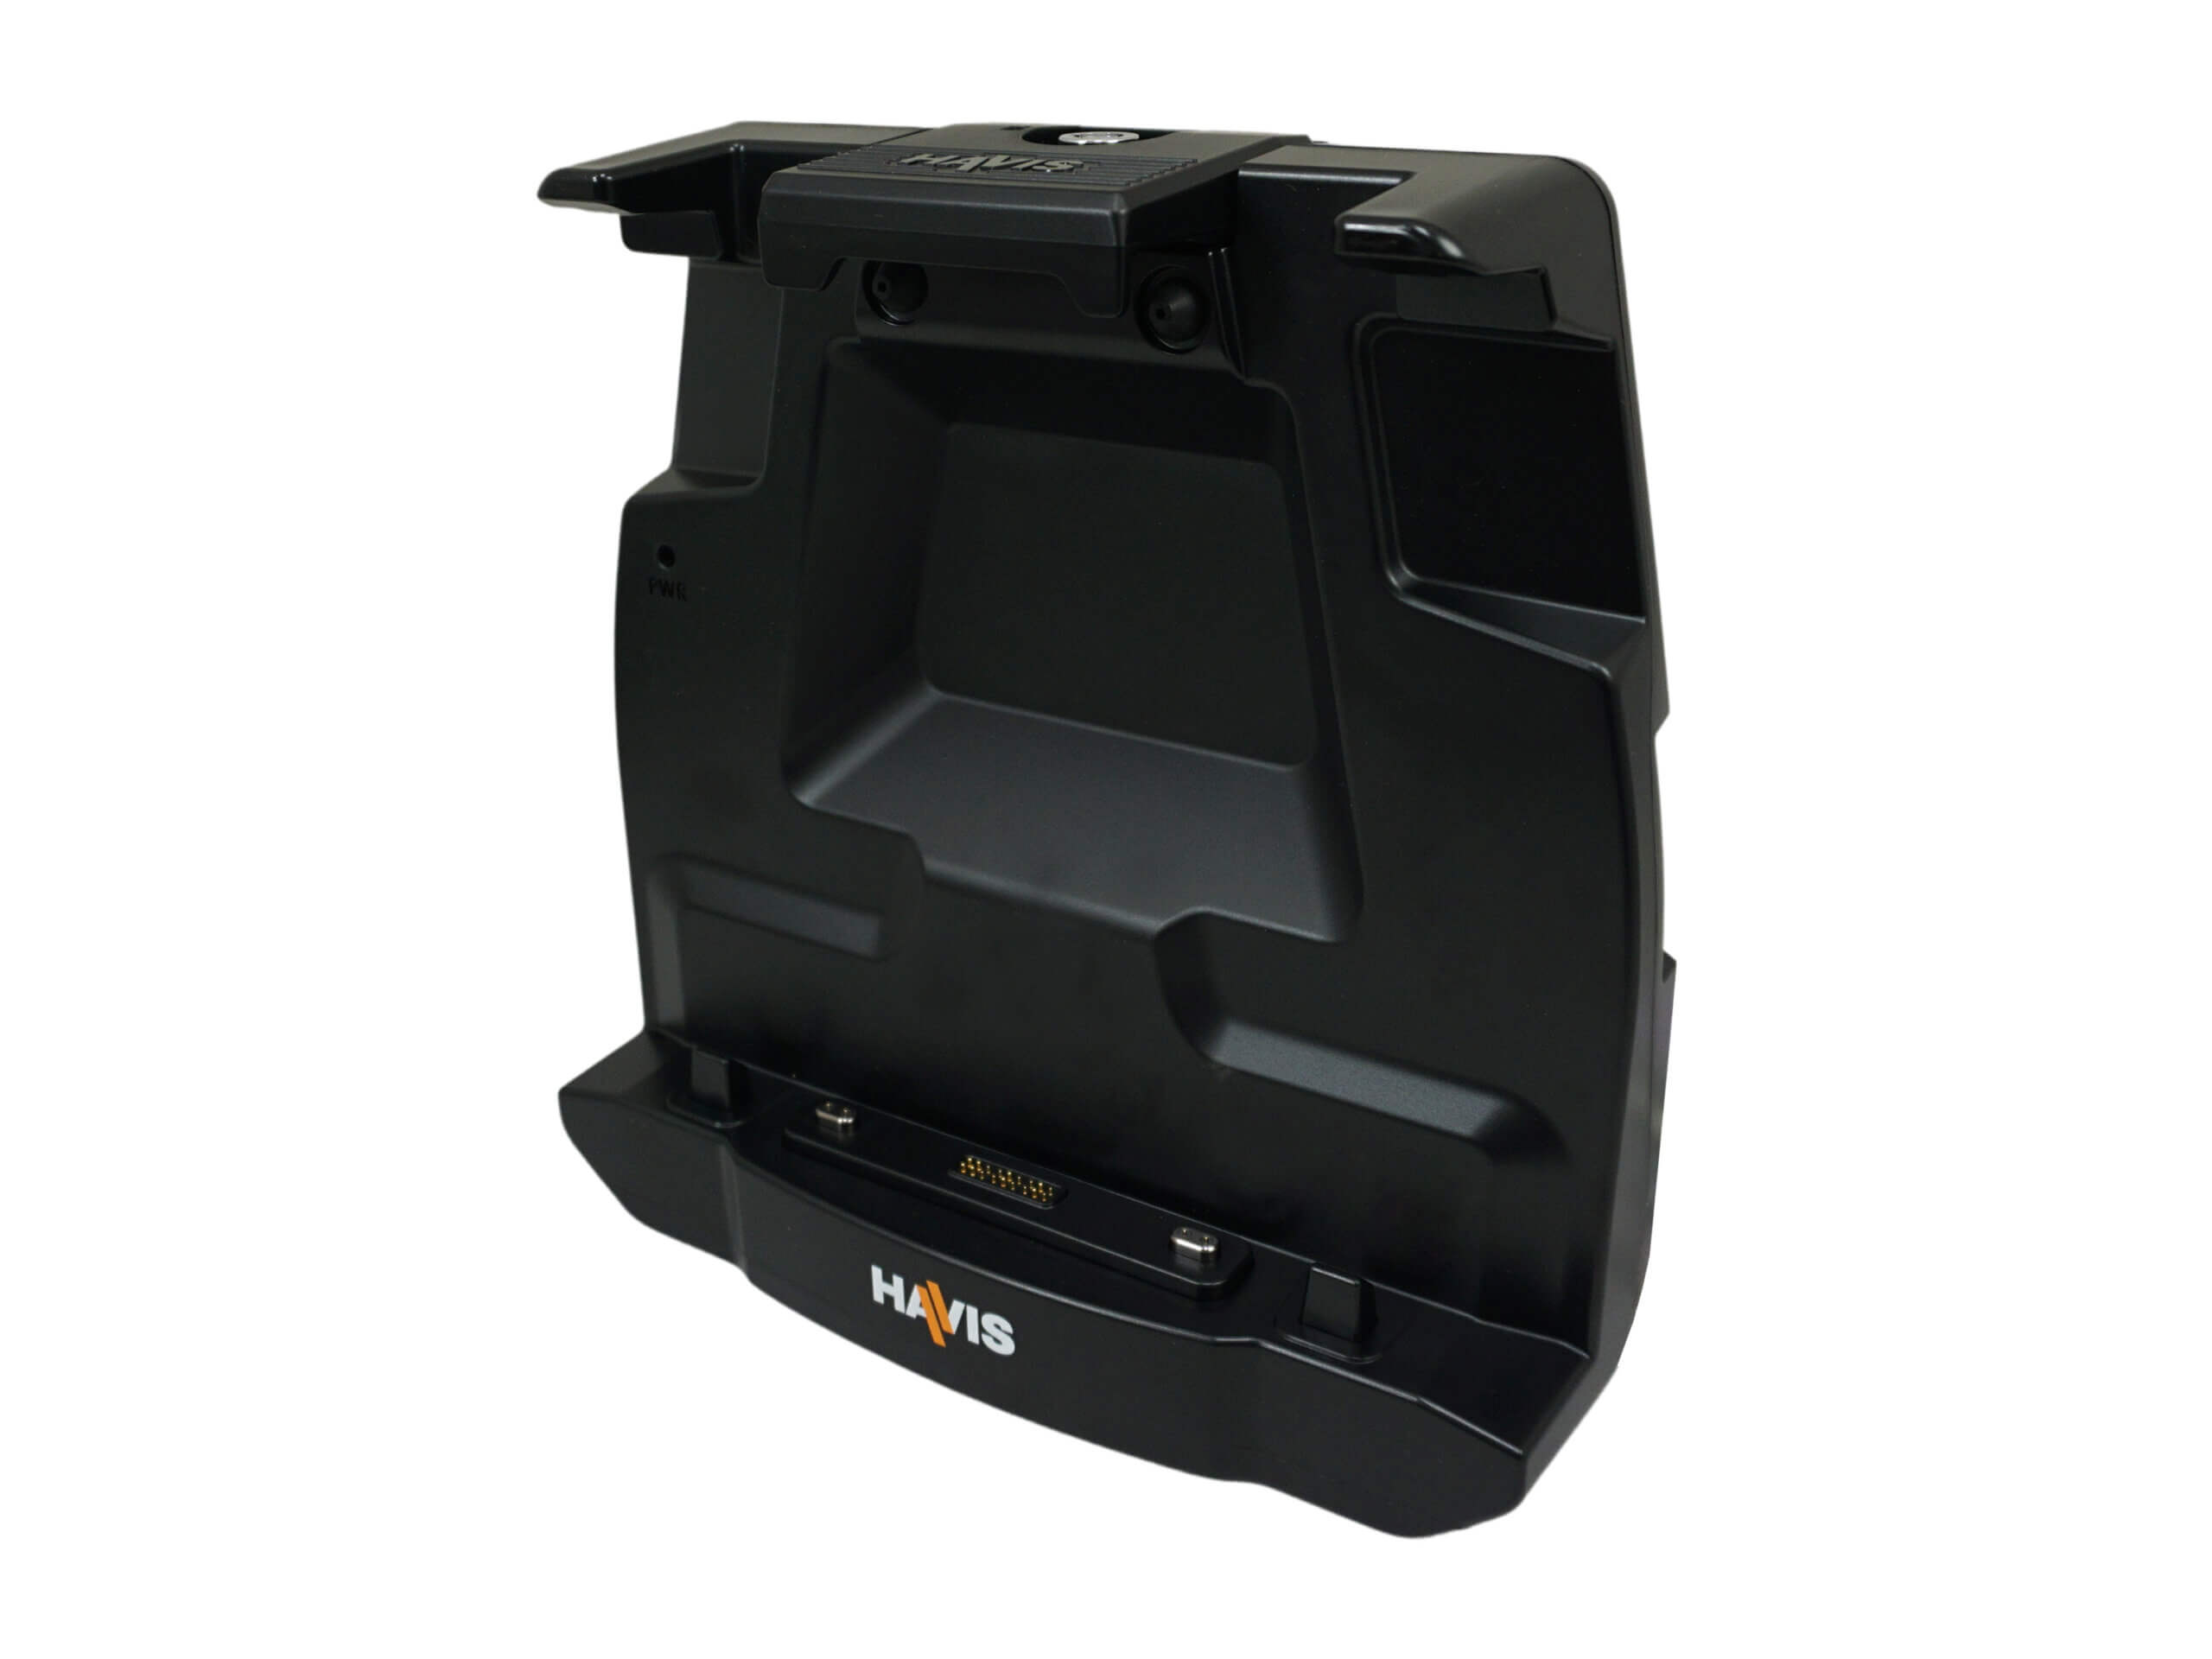 Docking Station for Dell’s 7230 Tablet with Advanced Port Replication, Quad Pass-Thru Antenna Connection, and Internal, Non-isolated Power Supply